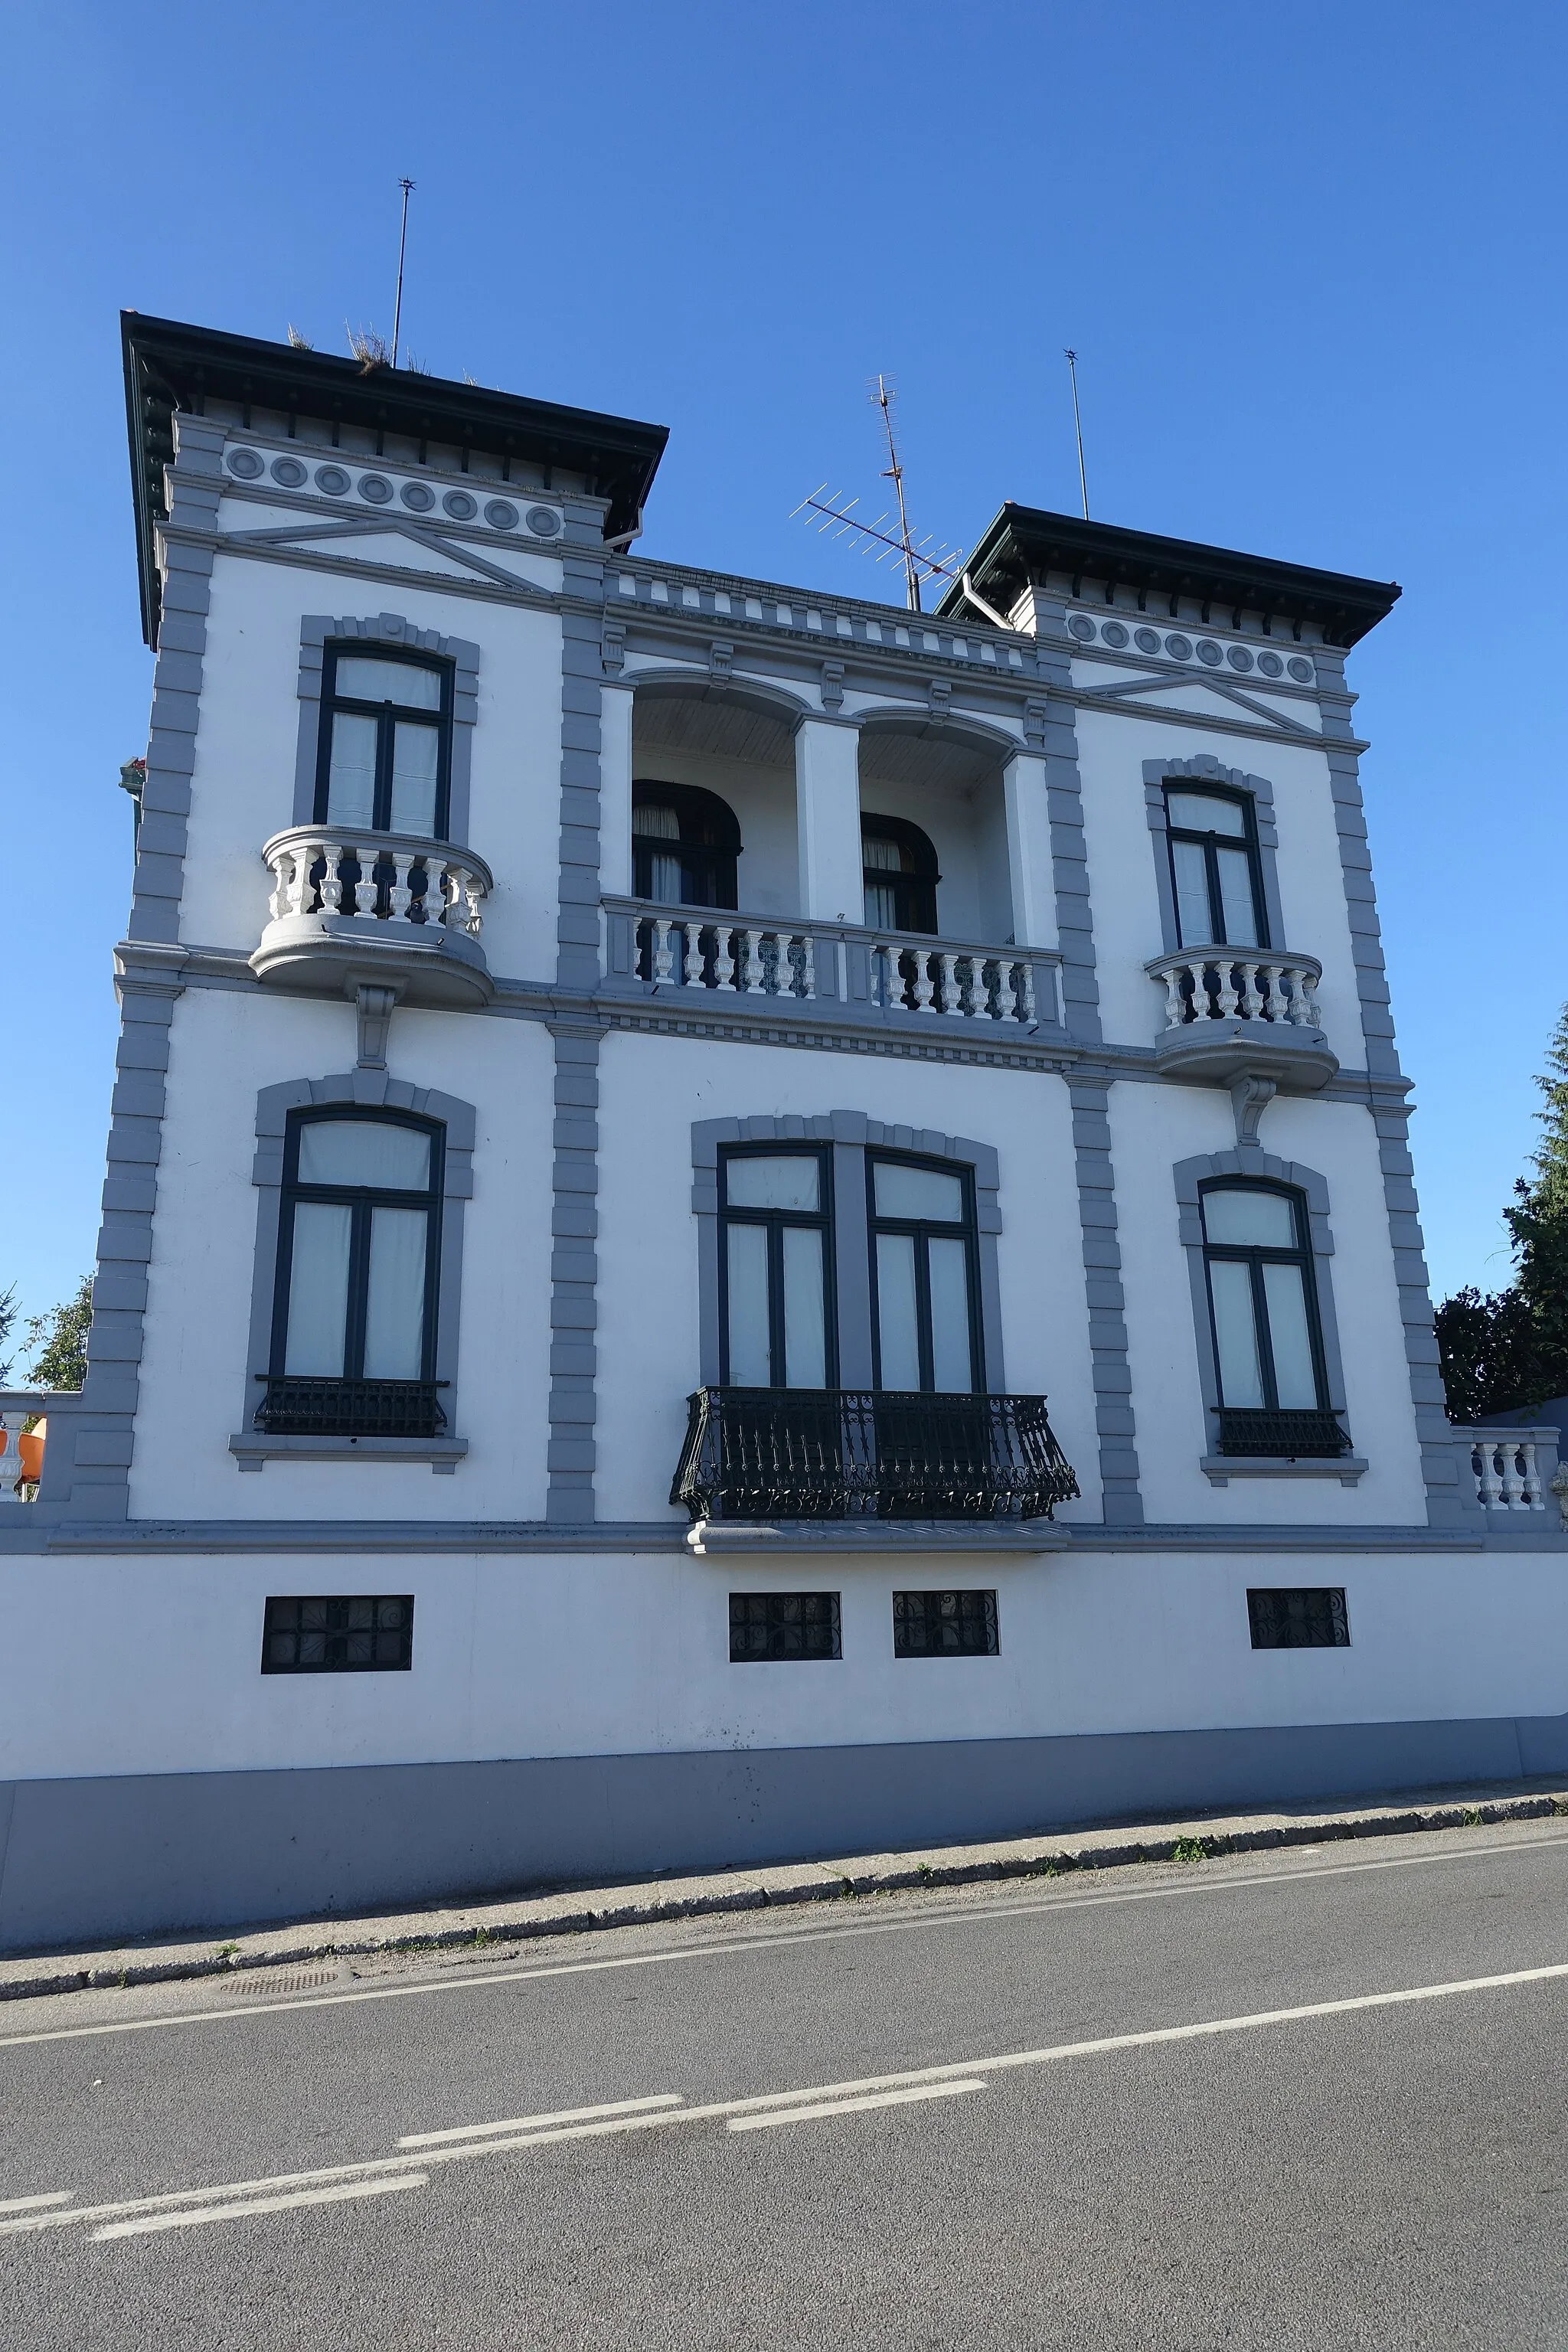 Photo showing: House in Viatodos Barcelos Portugal.